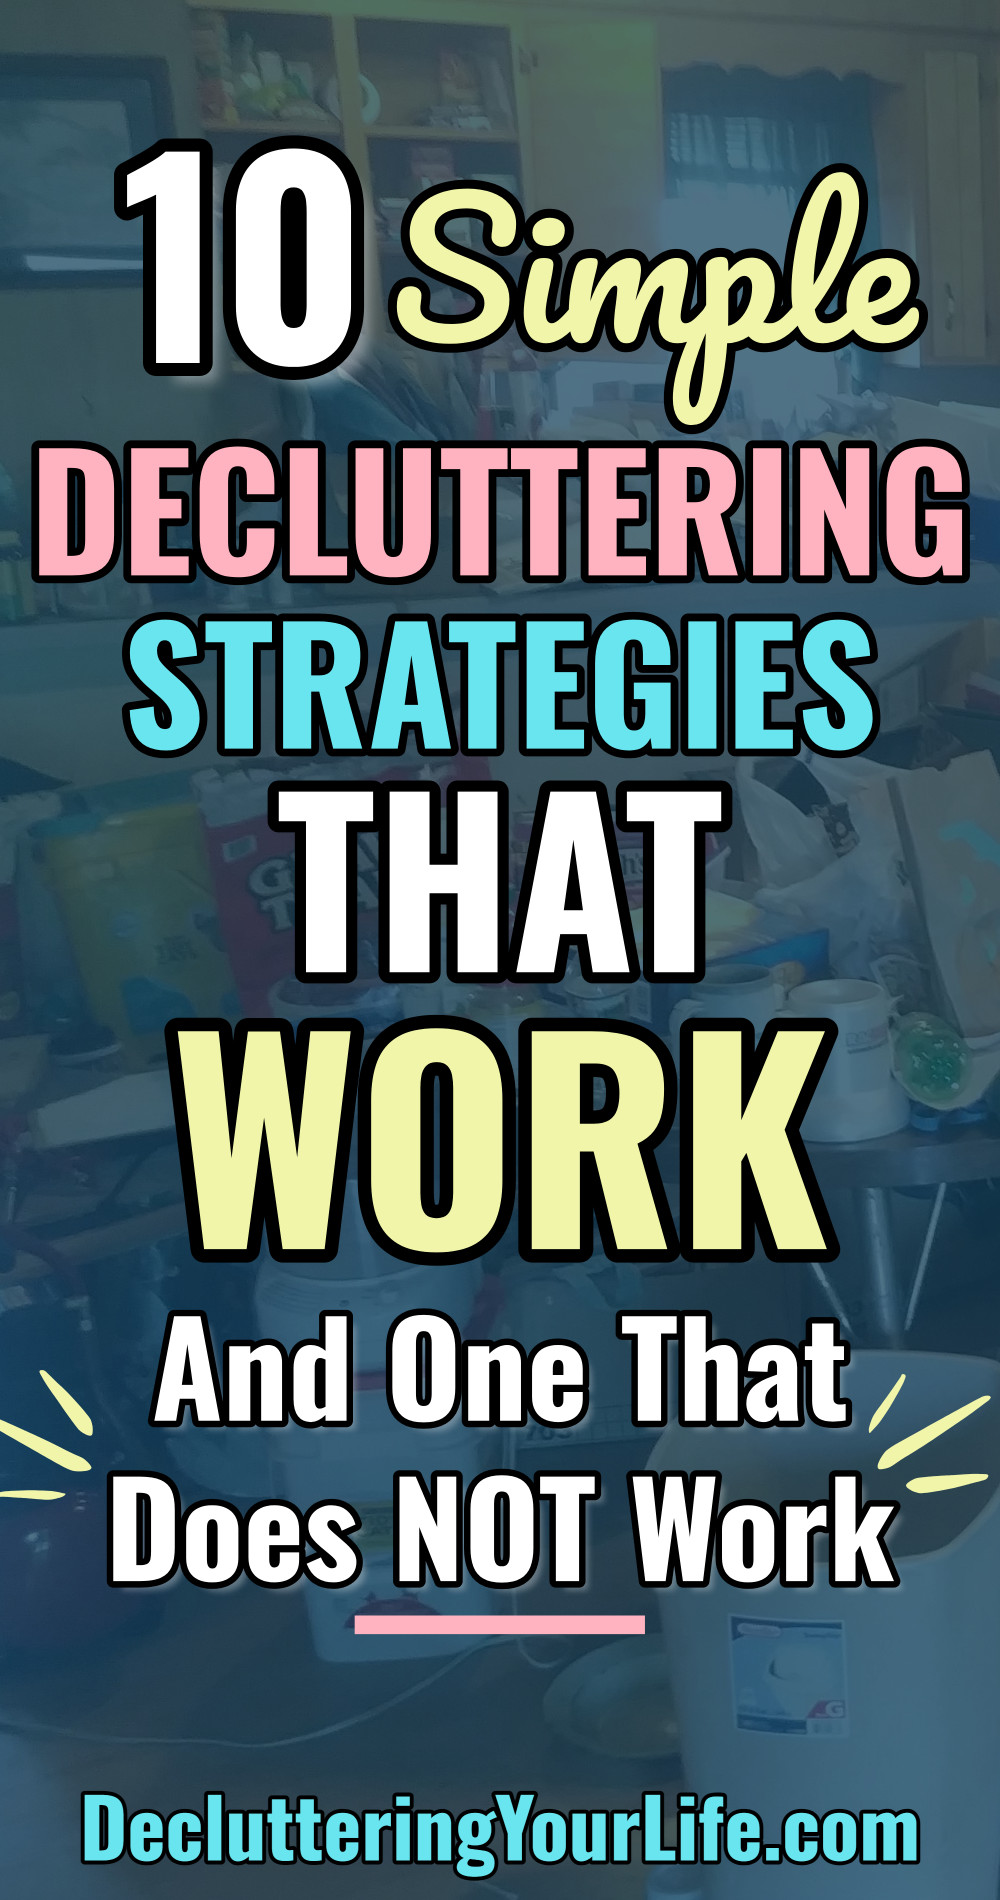 10 Decluttering Strategies That Work (and one that does NOT work!)